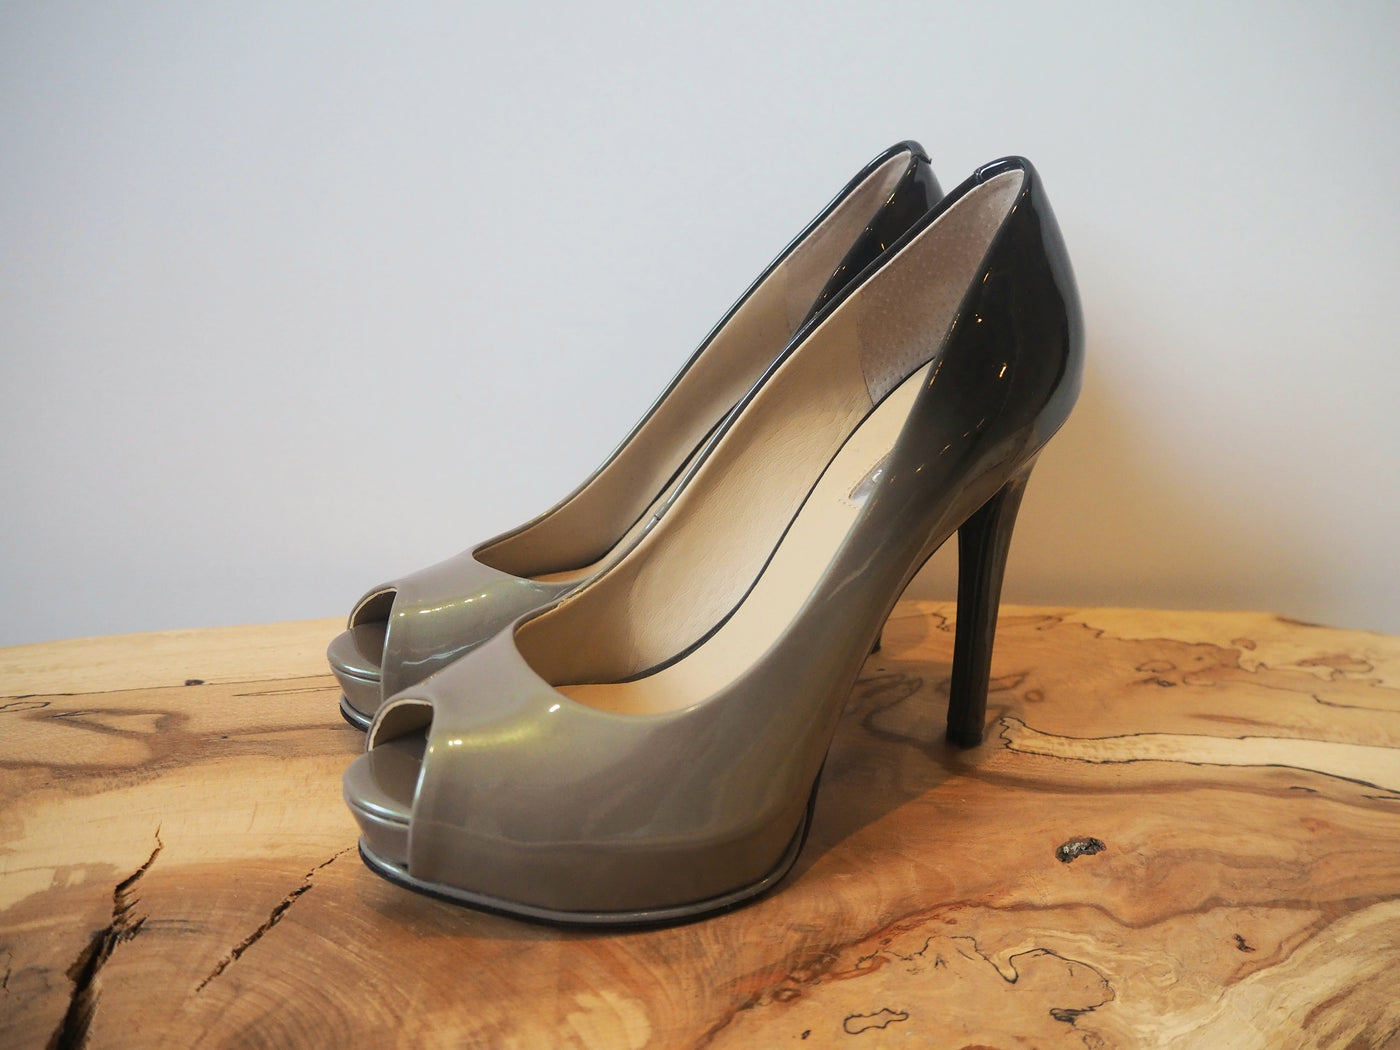 Guess Grey Ombre Platforms Size 4